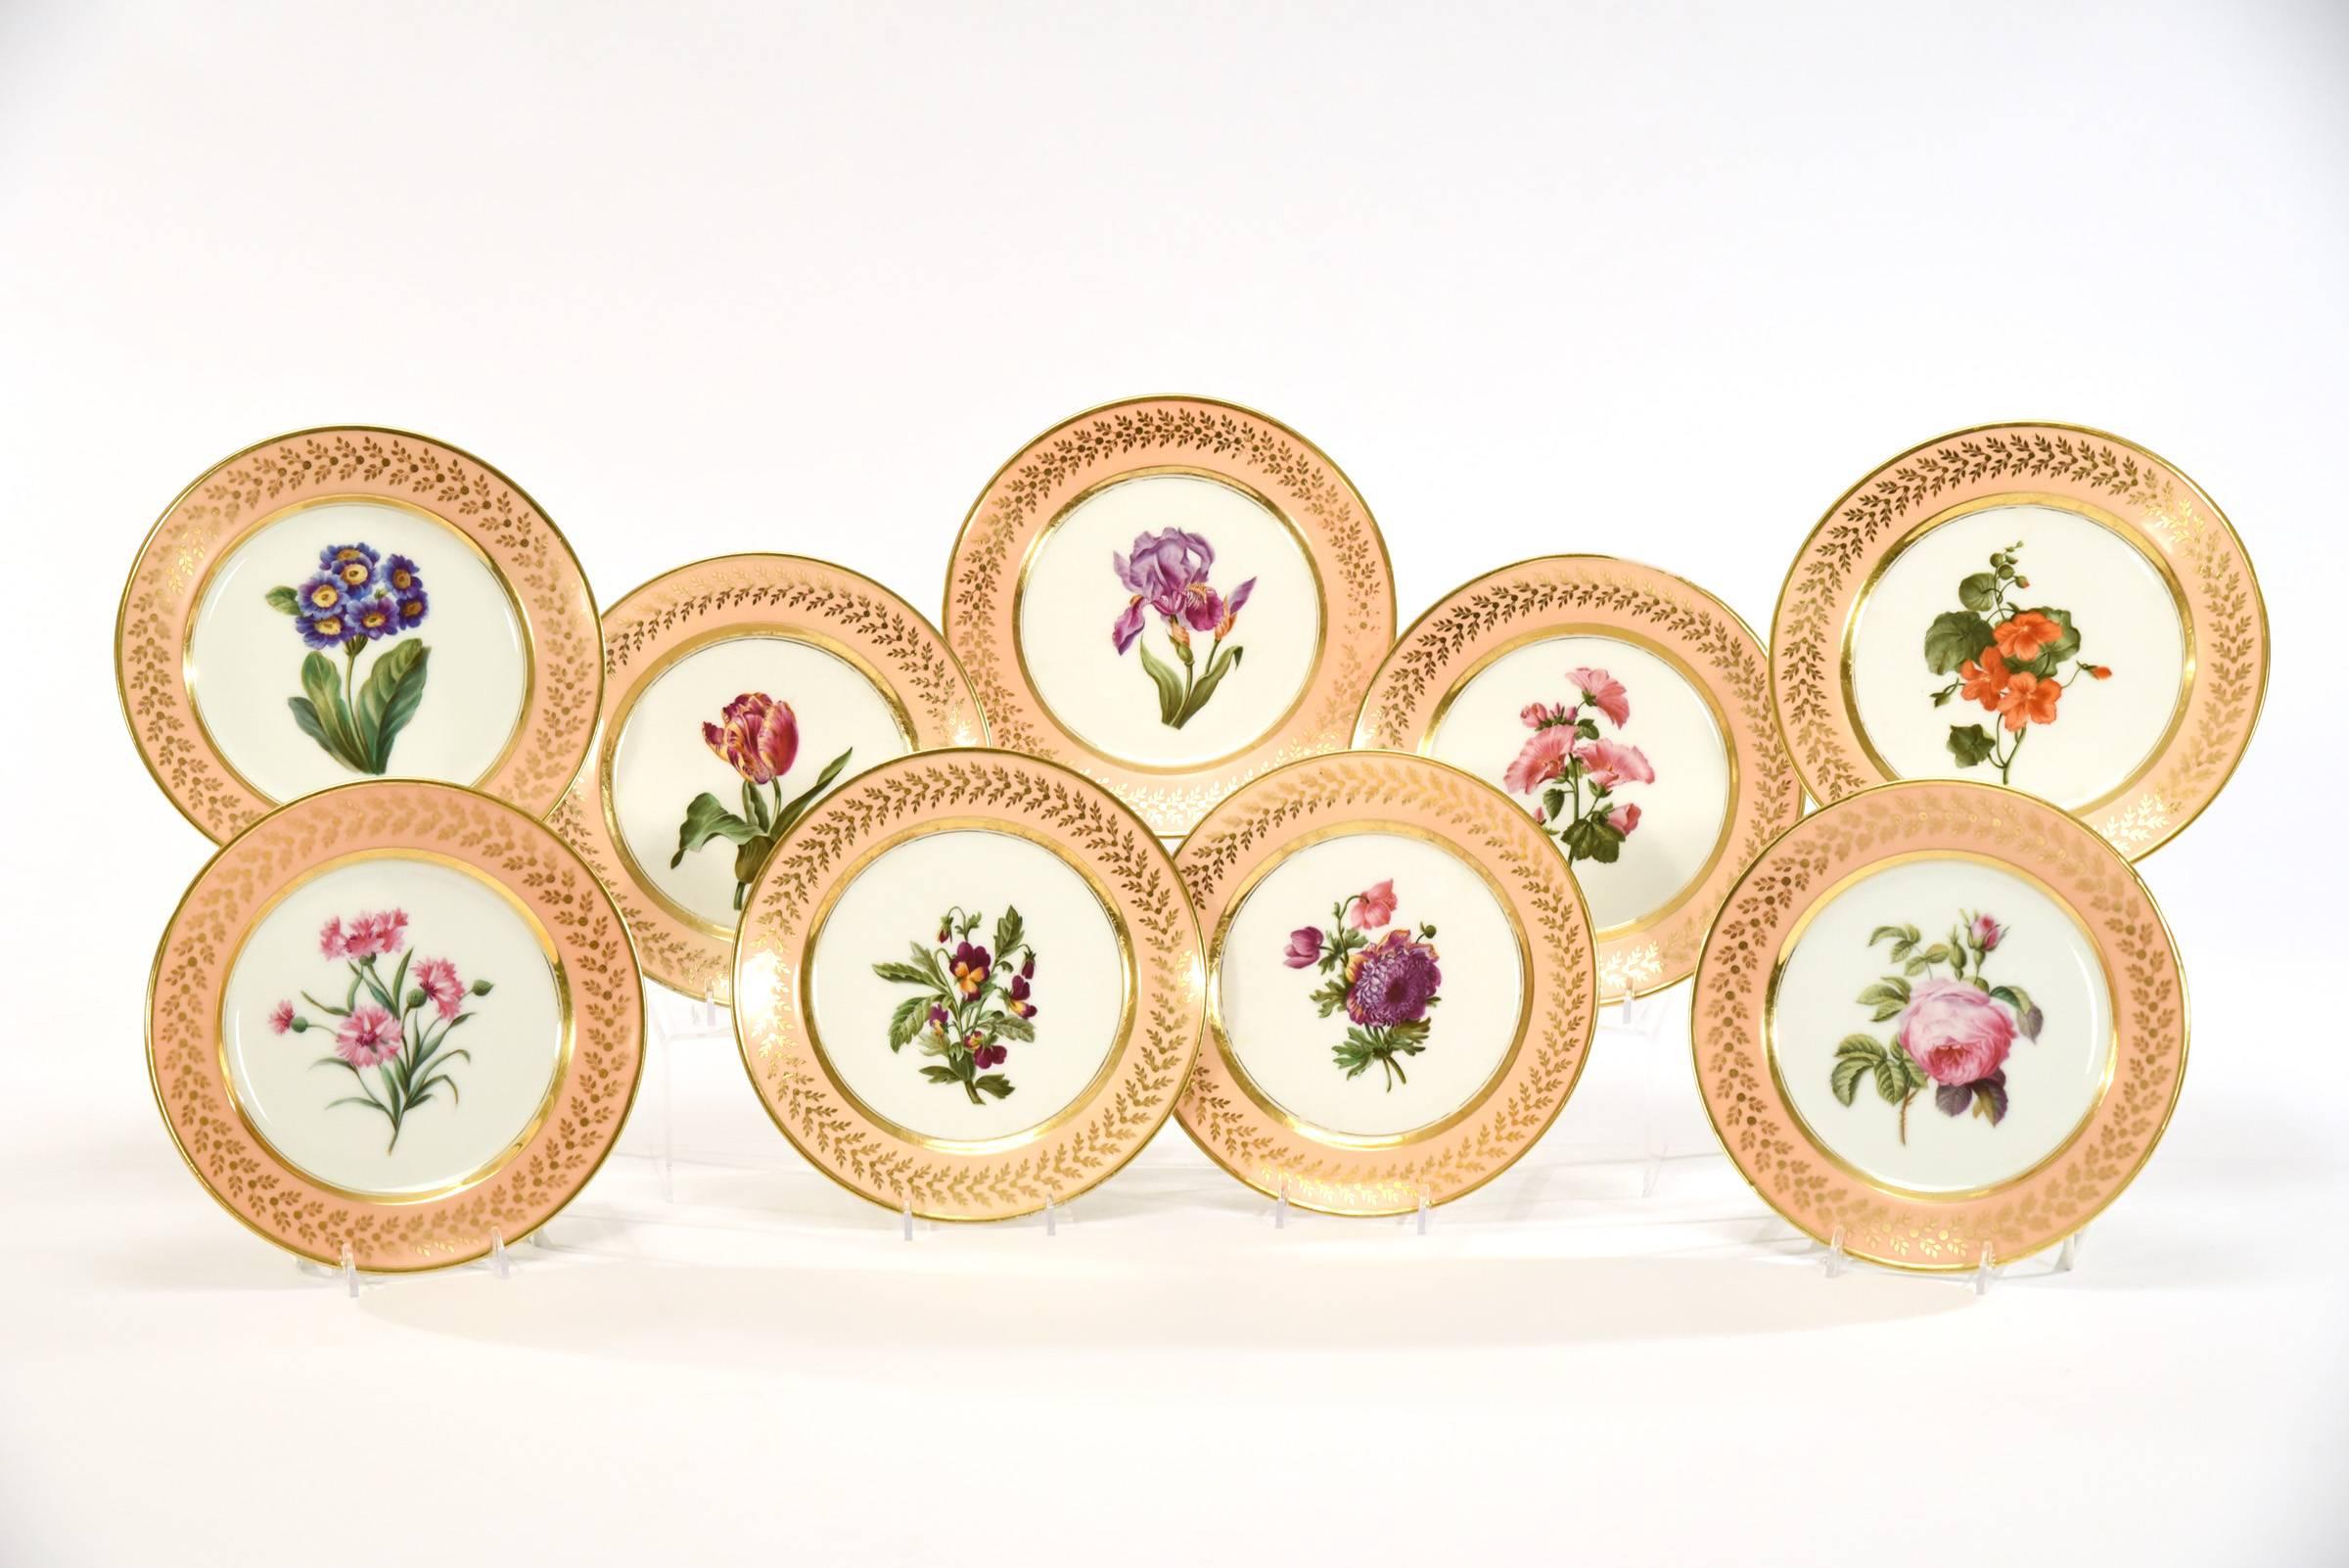 Simple and elegant, this set of Ancienne Maison Dagoty, Edourd Honore, botanical plates and serving pieces showcase the beauty and precision of the hand-painted flower specimens. These would make a stunning display with unique subjects framed by